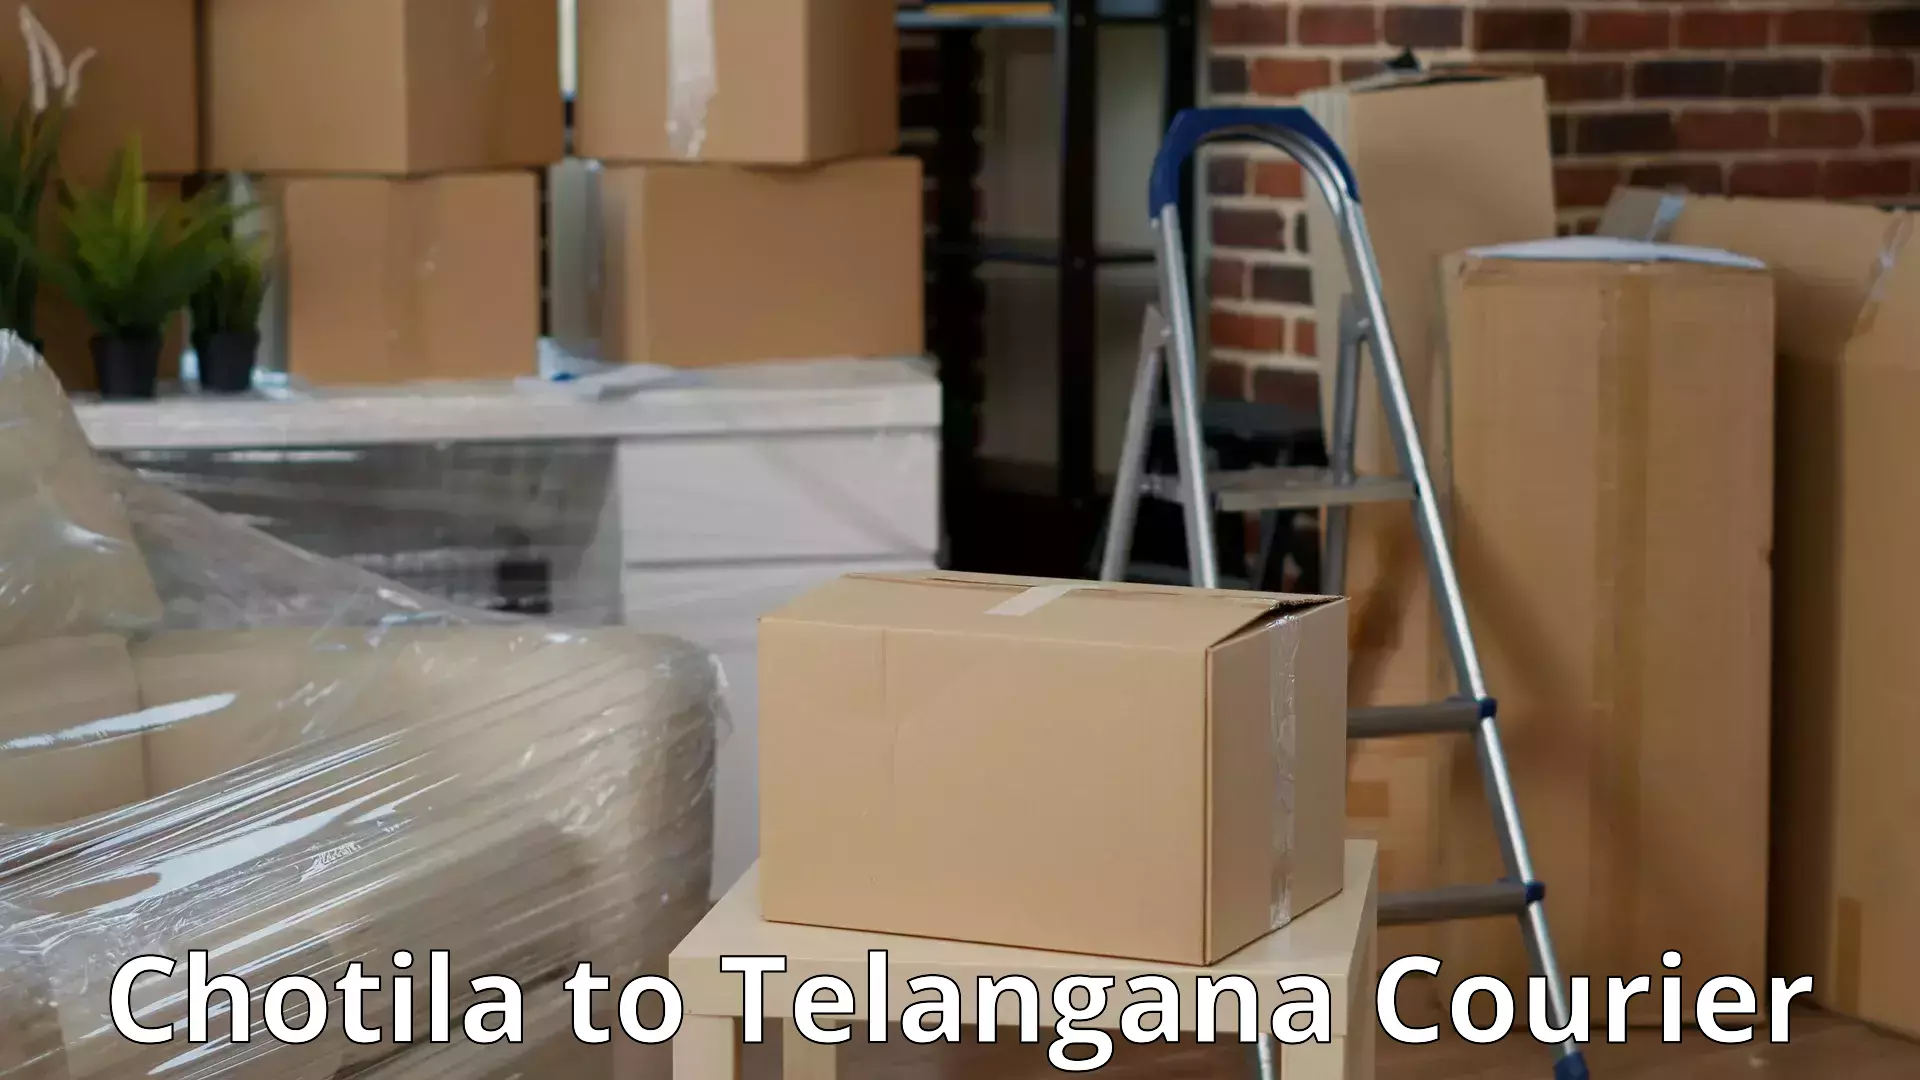 Affordable relocation services Chotila to Yellareddy